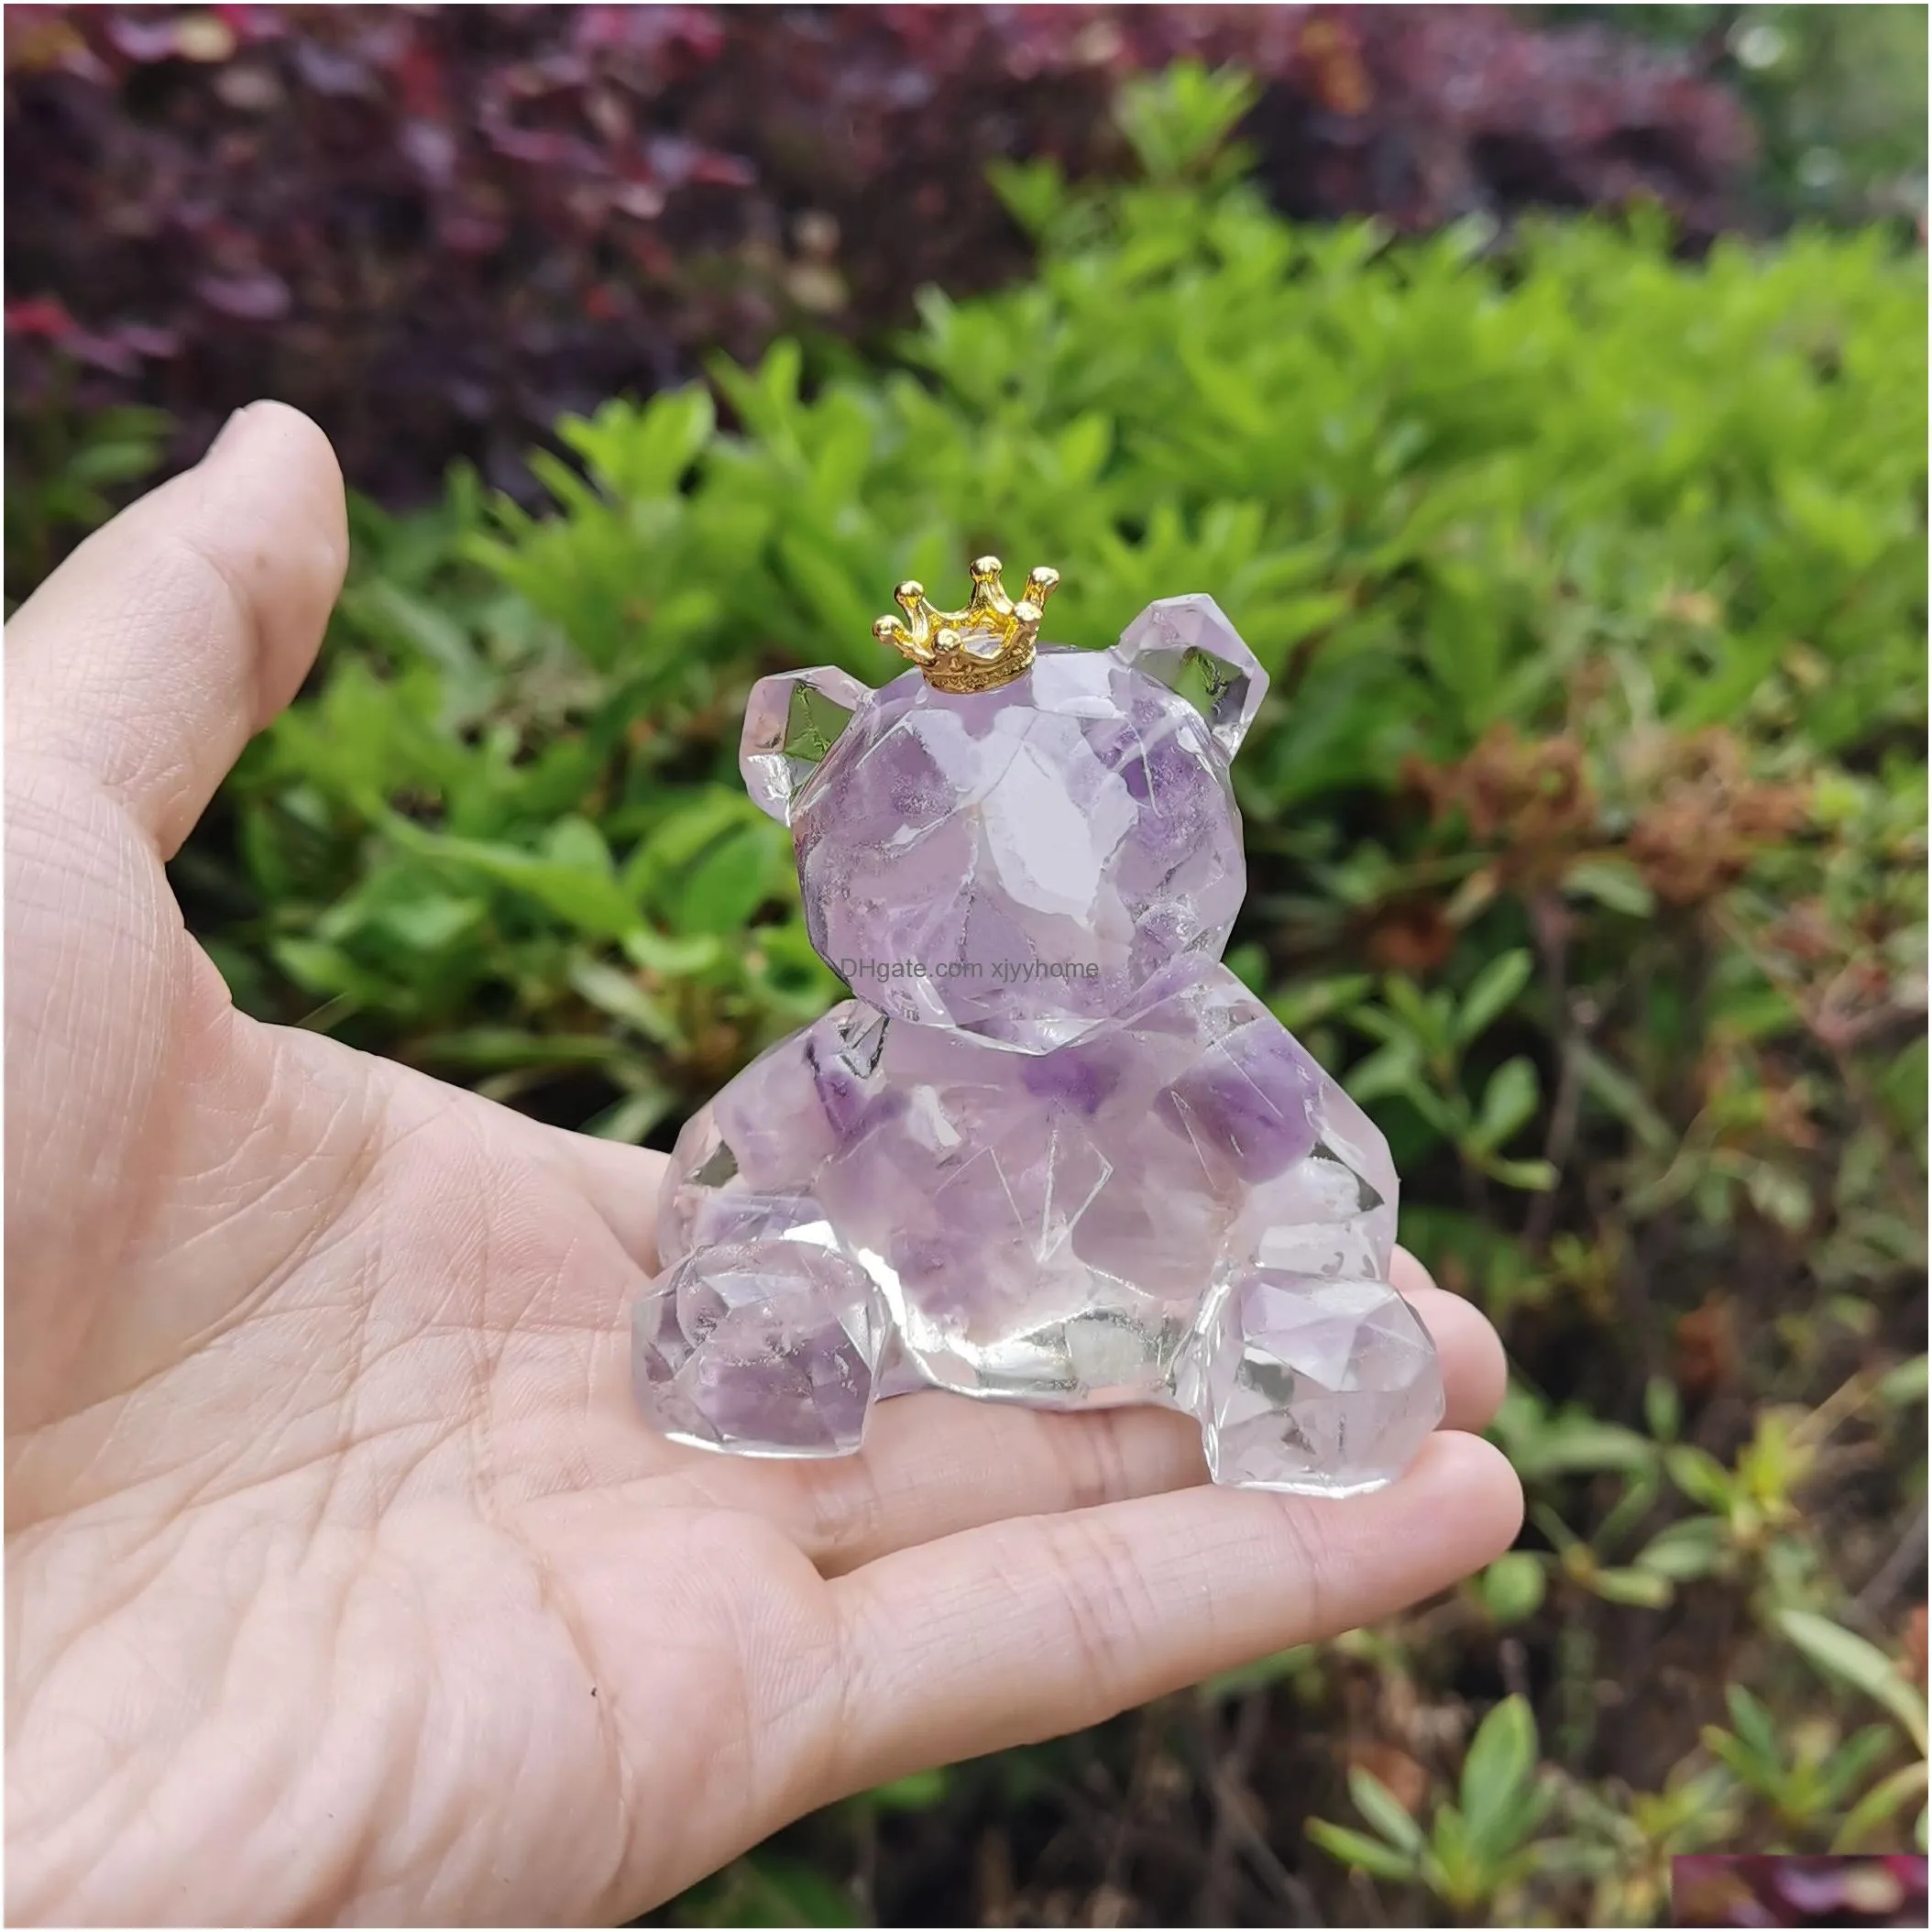 Decorative Objects & Figurines Decorative Figurines Amethyst Crystal Bear Desk Decor Gifts For Kids Women Girlfriend Home Decorations Dhcf9